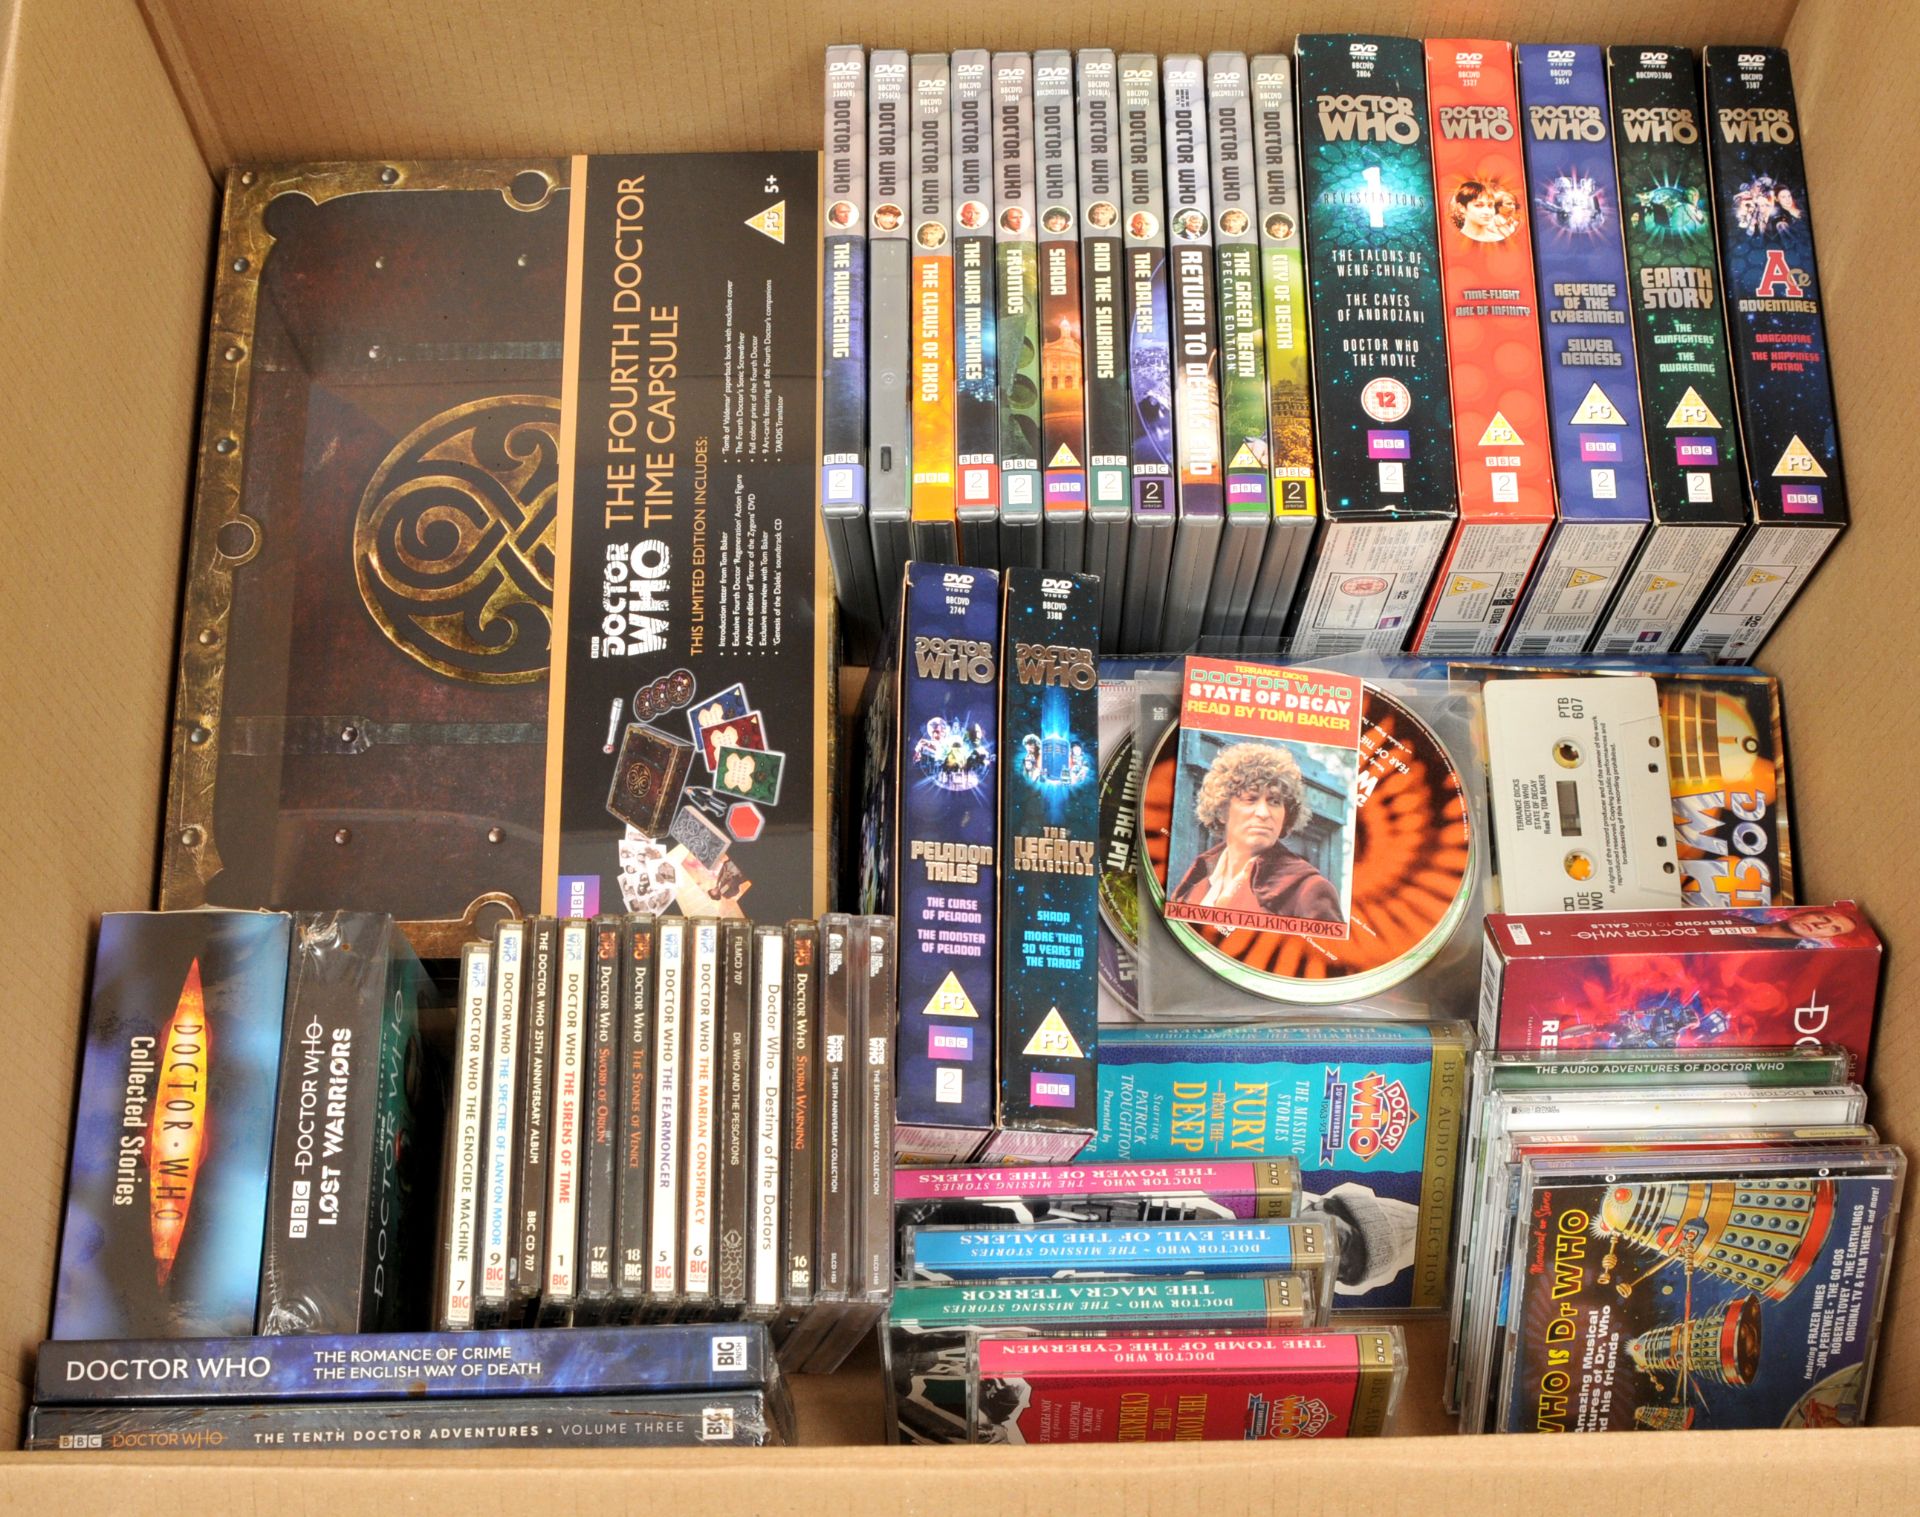 Doctor Who related DVDs, CDs and Cassettes